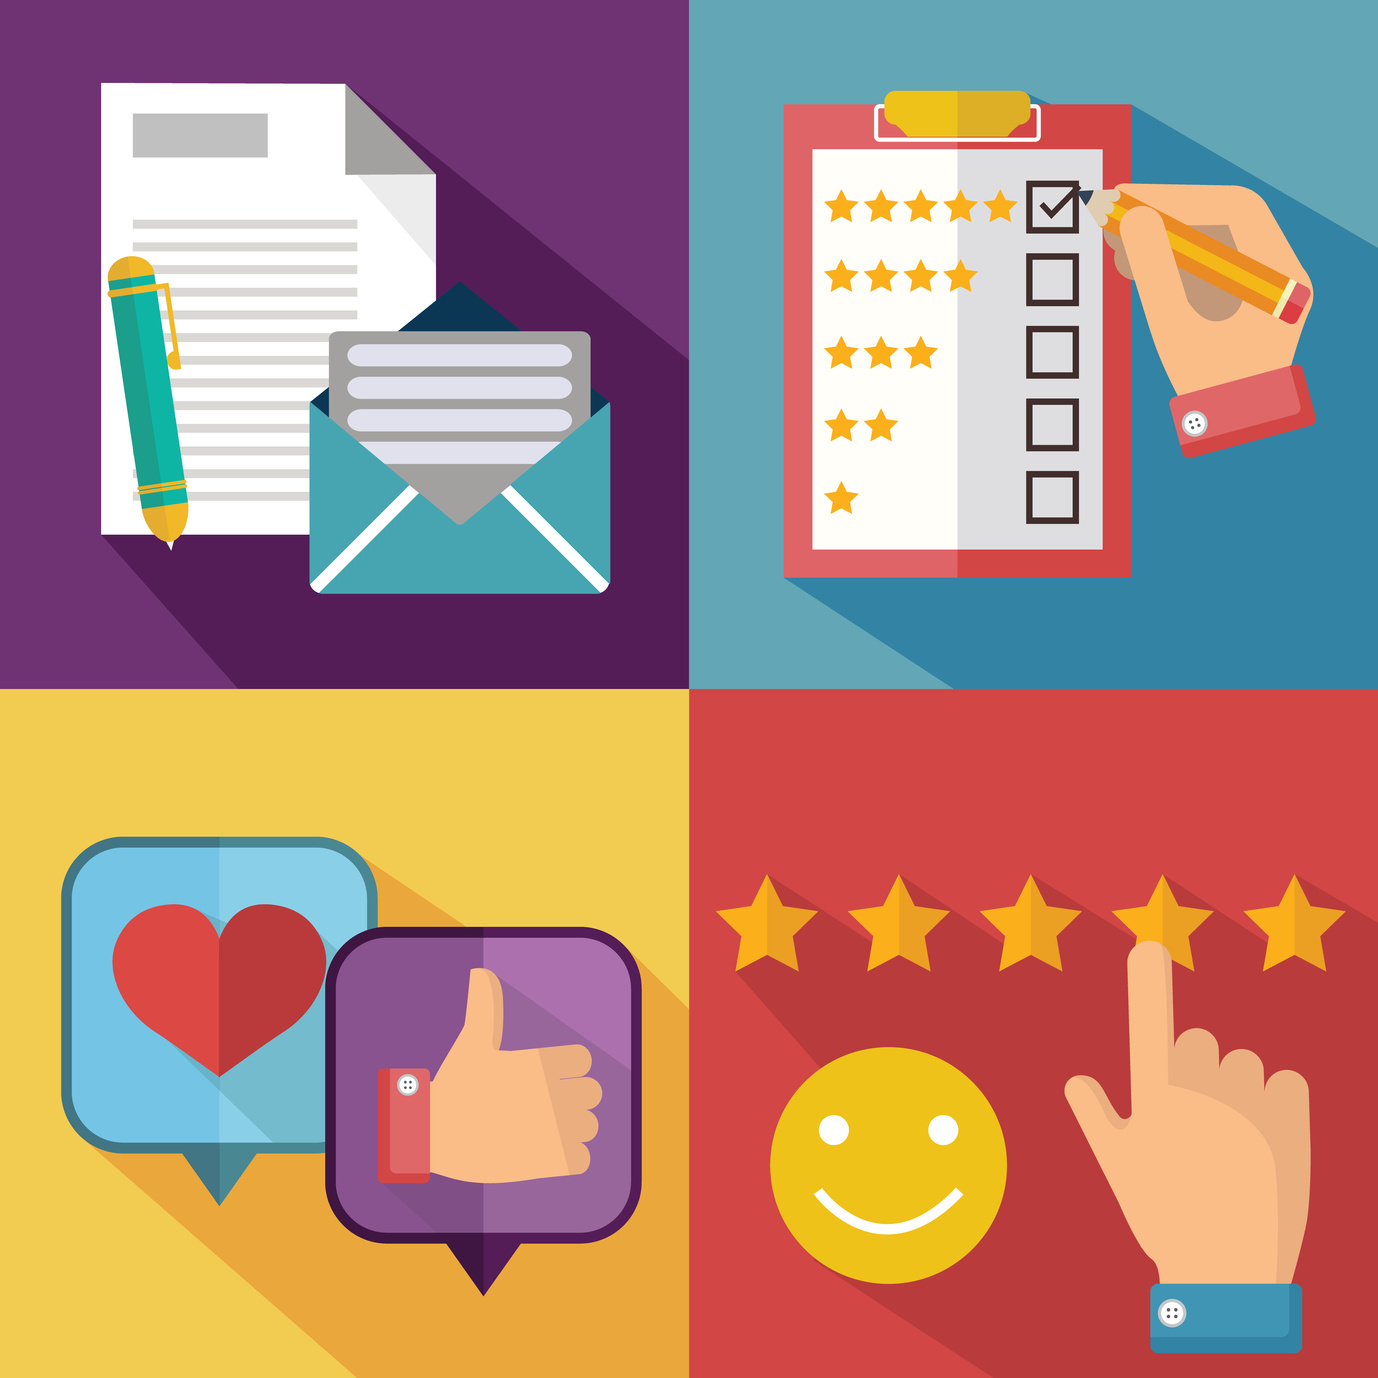 8 performance appraisal methods you should be aware of.